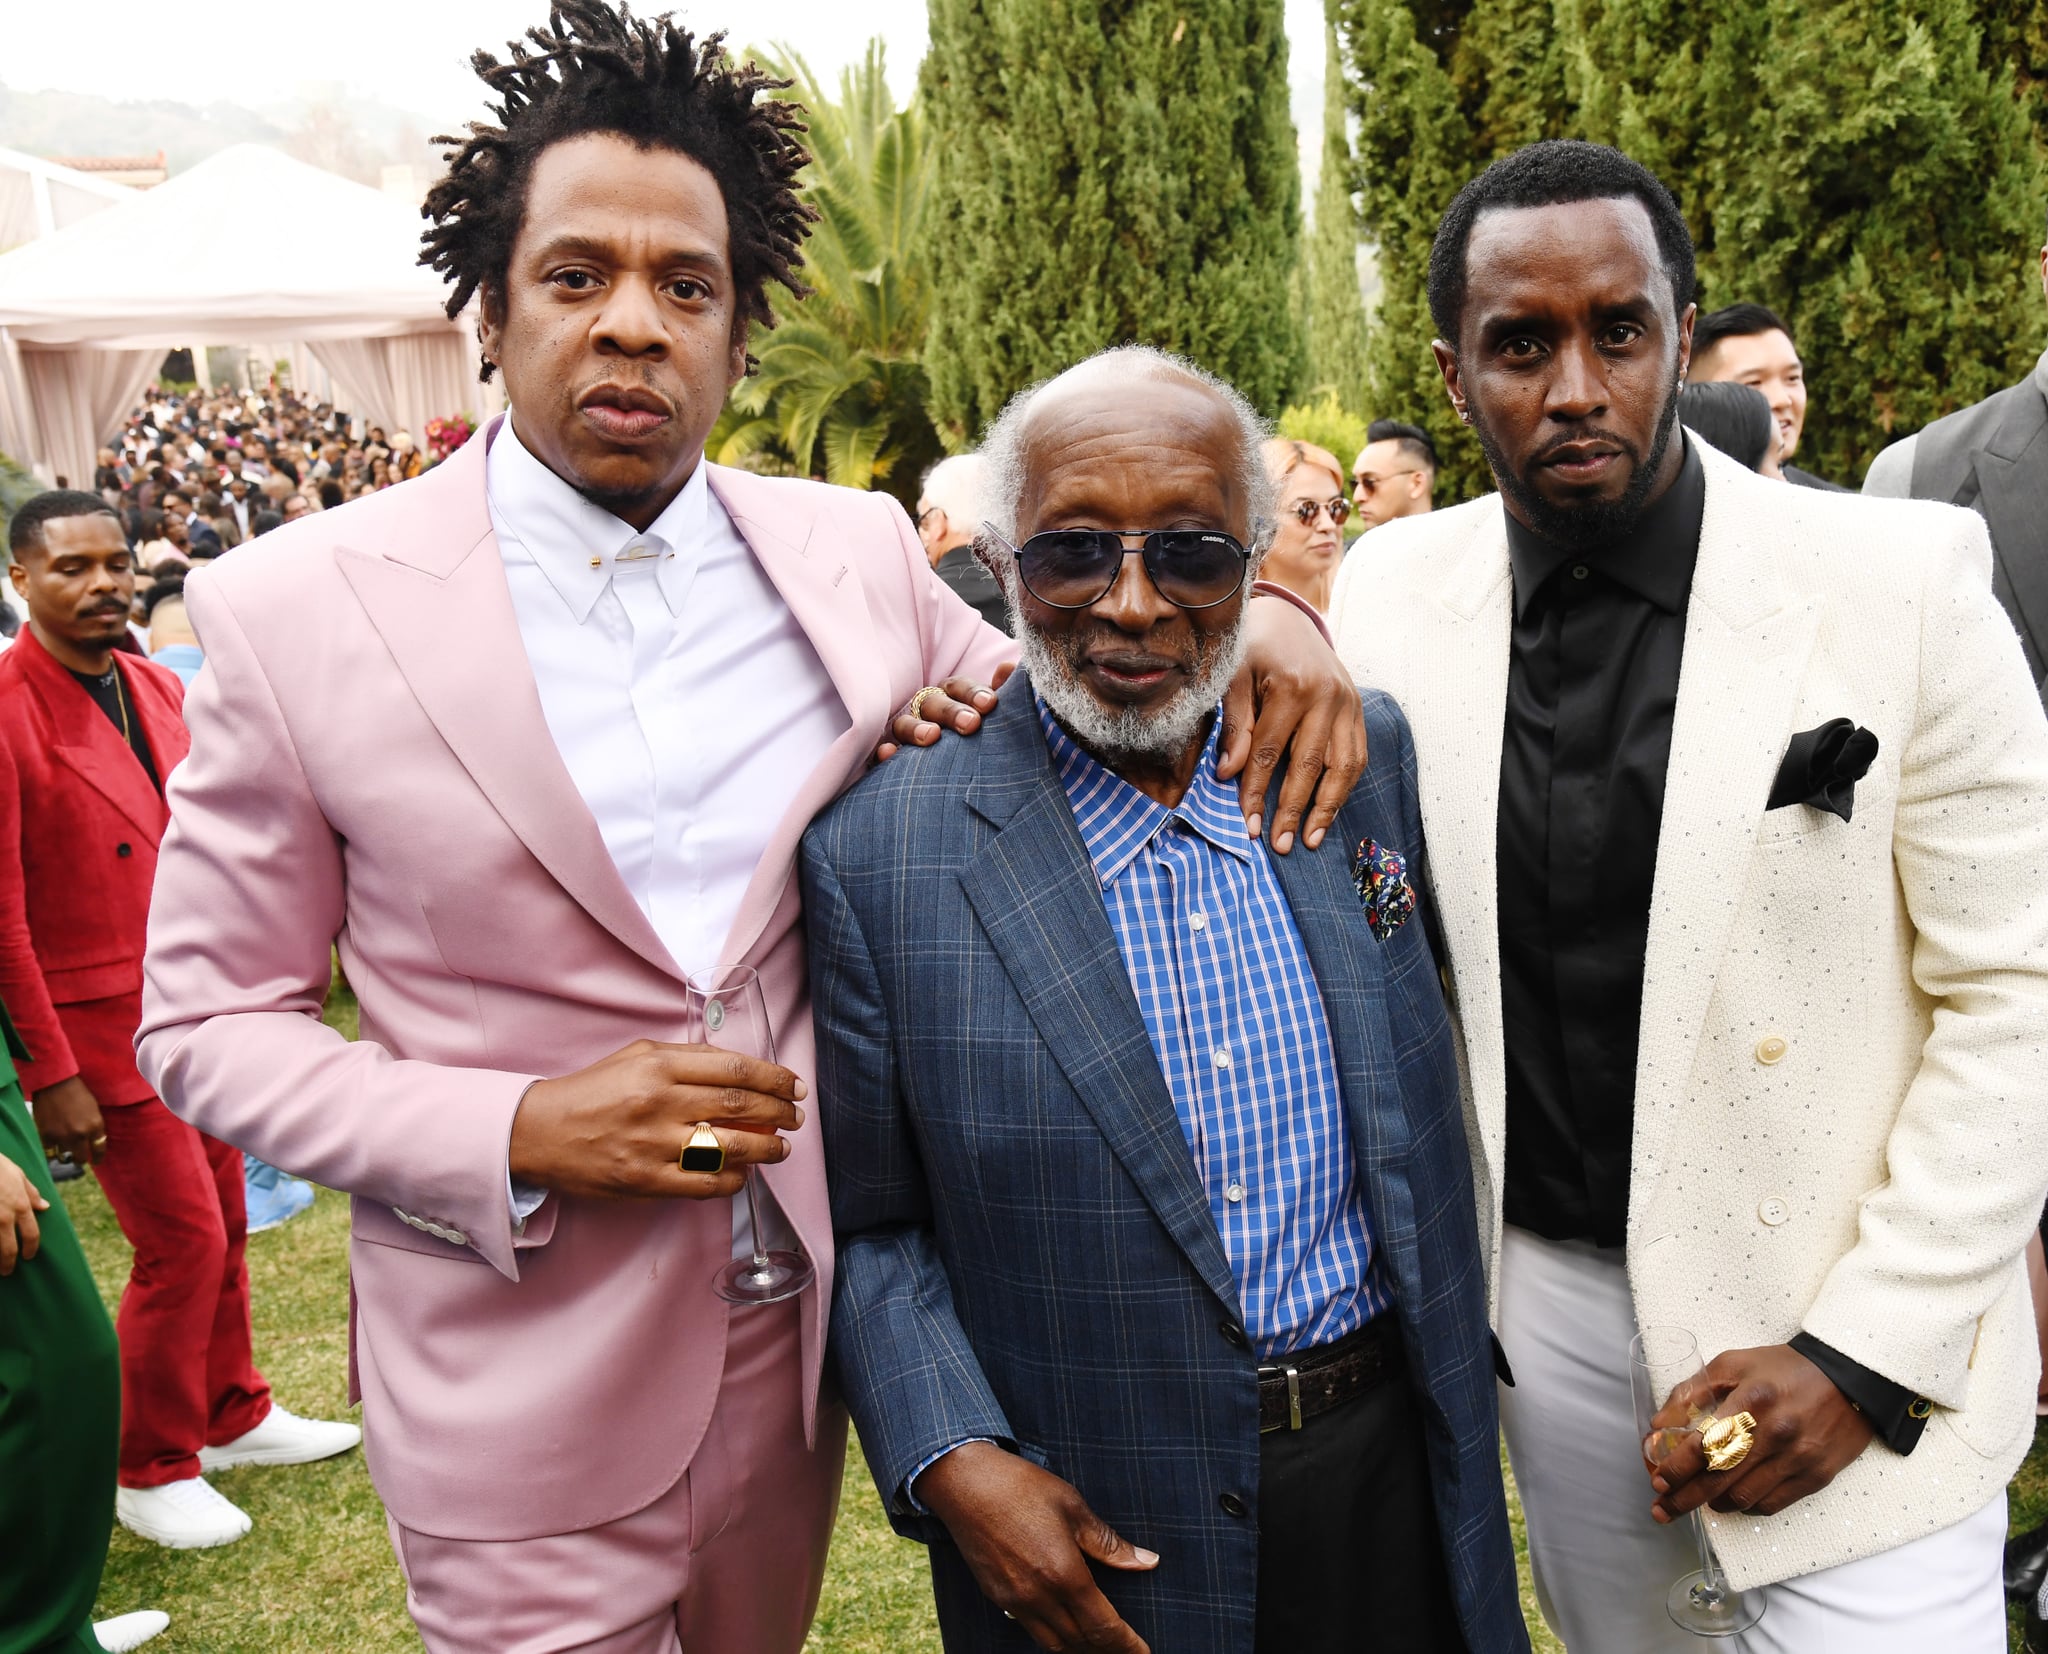 JAY-Z, Clarence Avant, and Diddy at the 2020 Roc Nation Brunch in LA |  Seeing Stars! Beyoncé and JAY-Z's Roc Nation Brunch Brings Out Some of  Music's Finest | POPSUGAR Celebrity UK